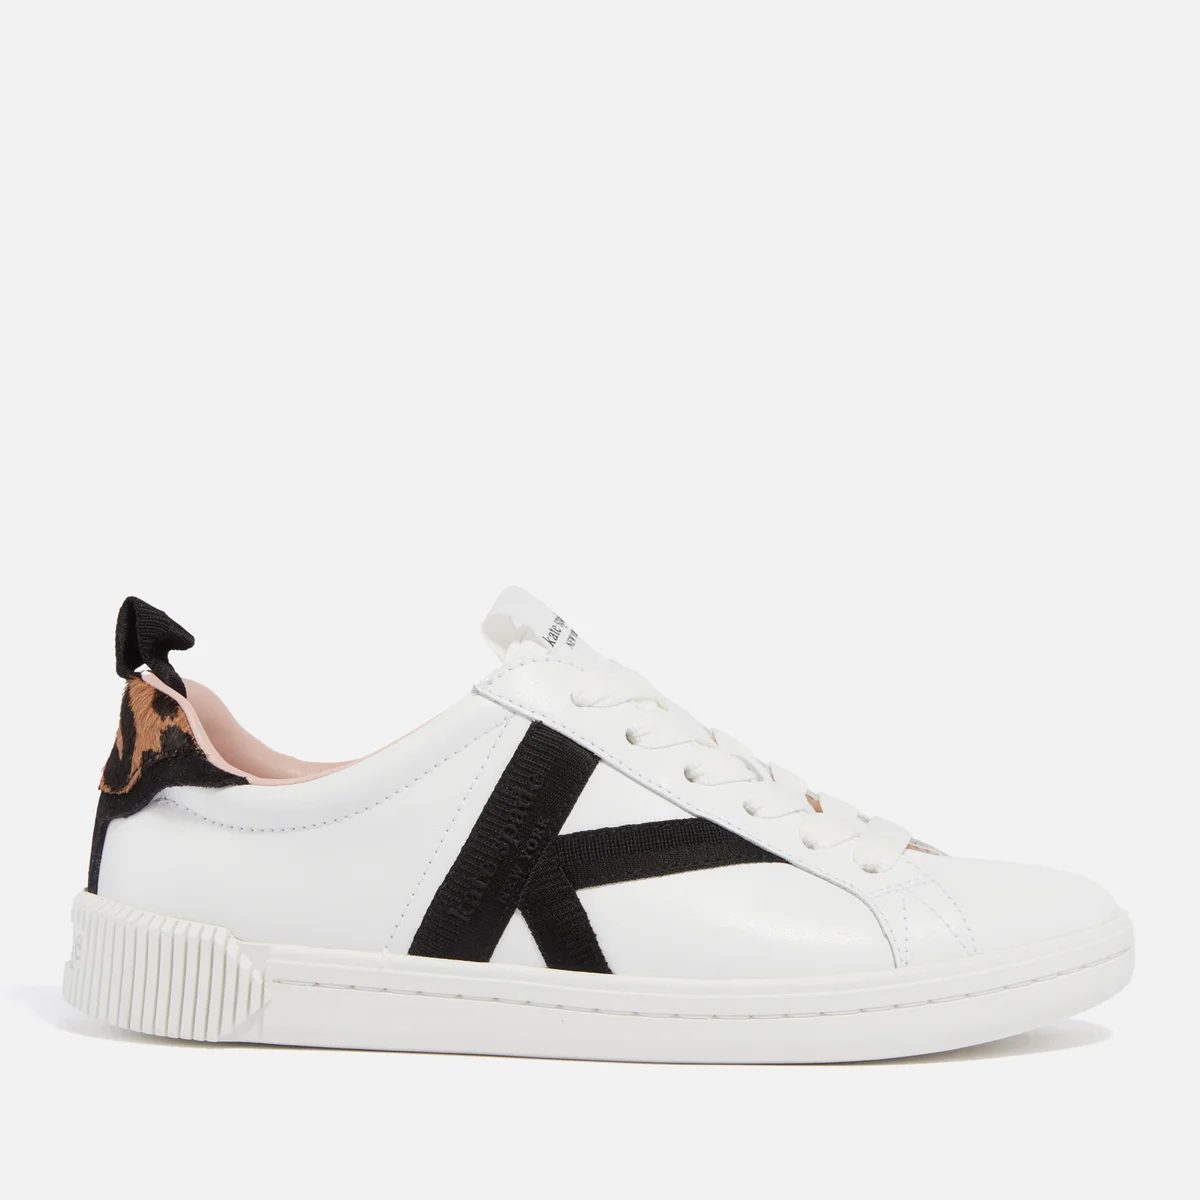 Kate Spade Women's Signature Leather Trainers Image 1